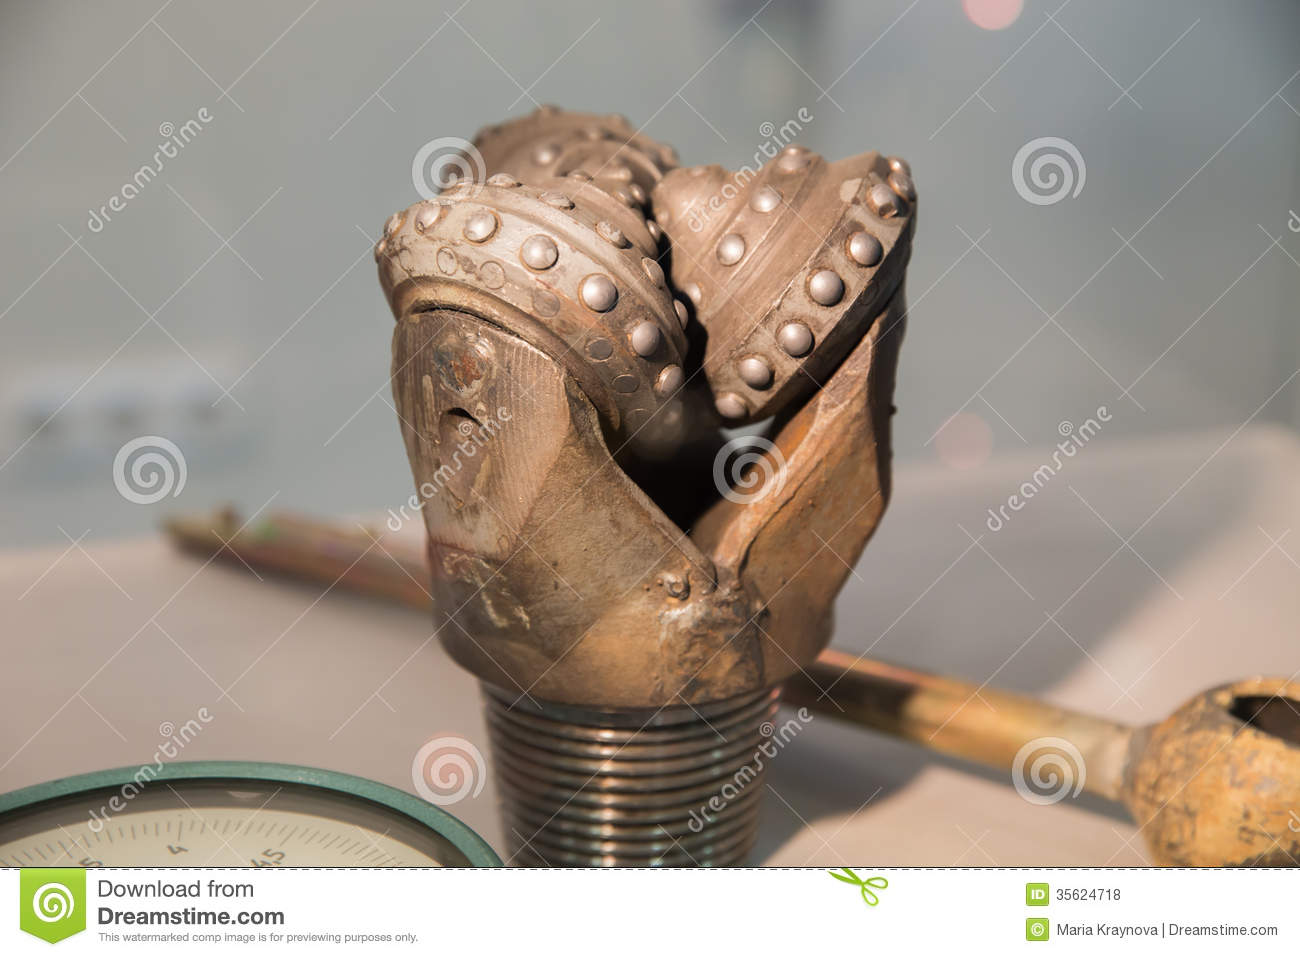 Oil Rig Drill Bit Royalty Free Stock Photos   Image  35624718